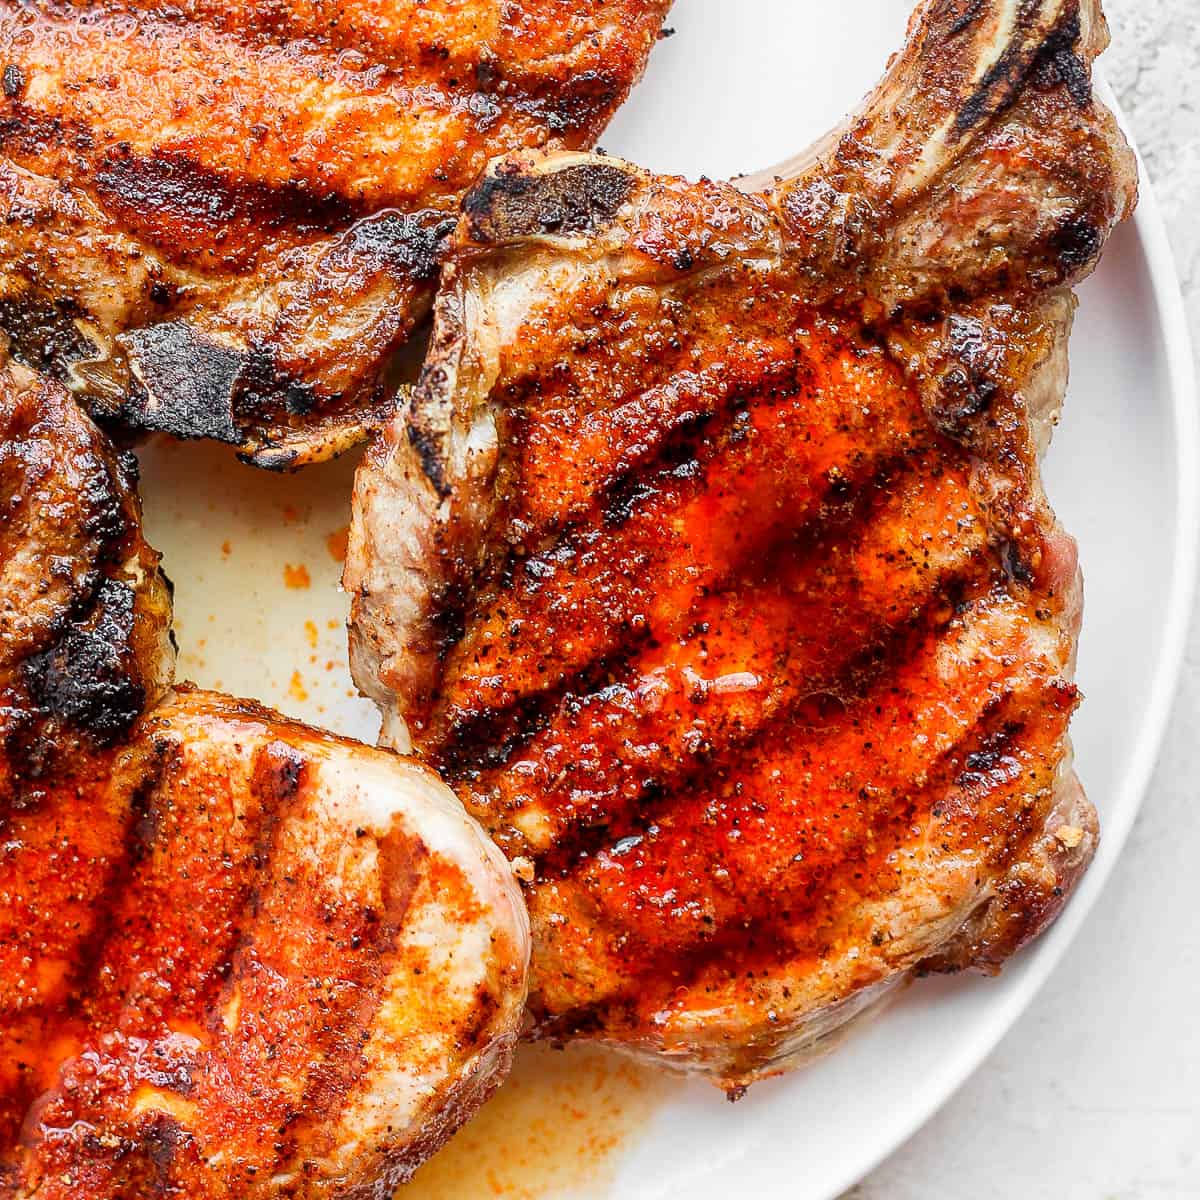 How to Grill Pork Chops (so juicy!) - The Wooden Skillet